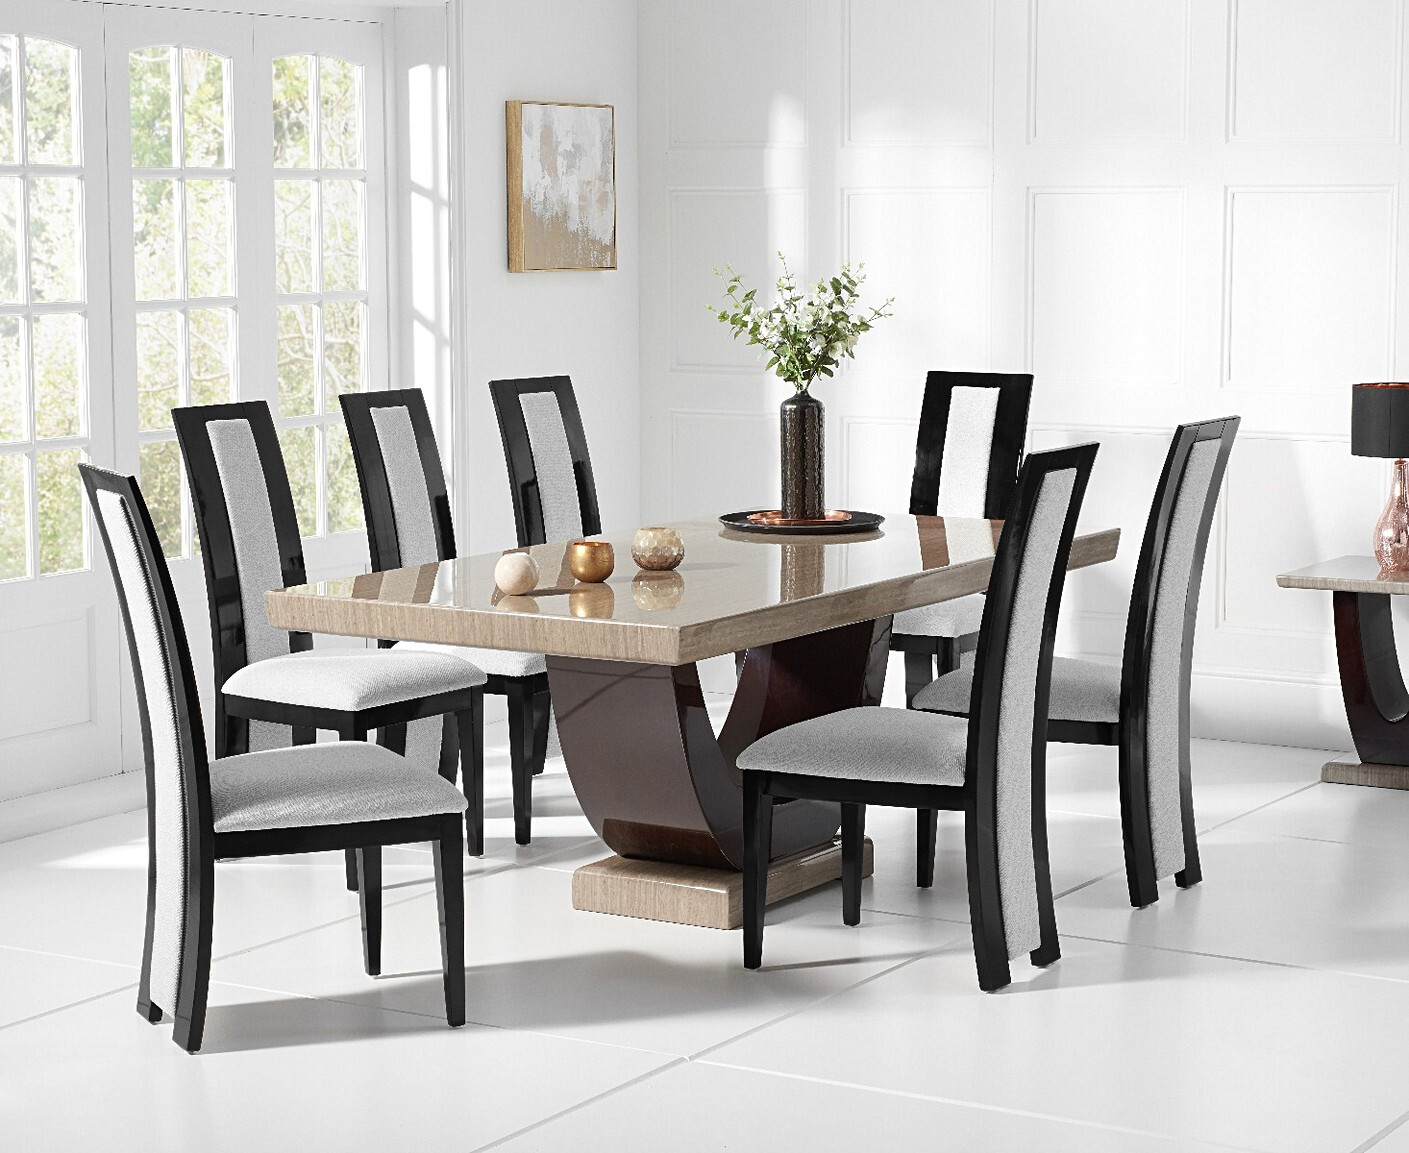 Photo 2 of Novara 200cm brown pedestal marble dining table with 6 brown novara chairs